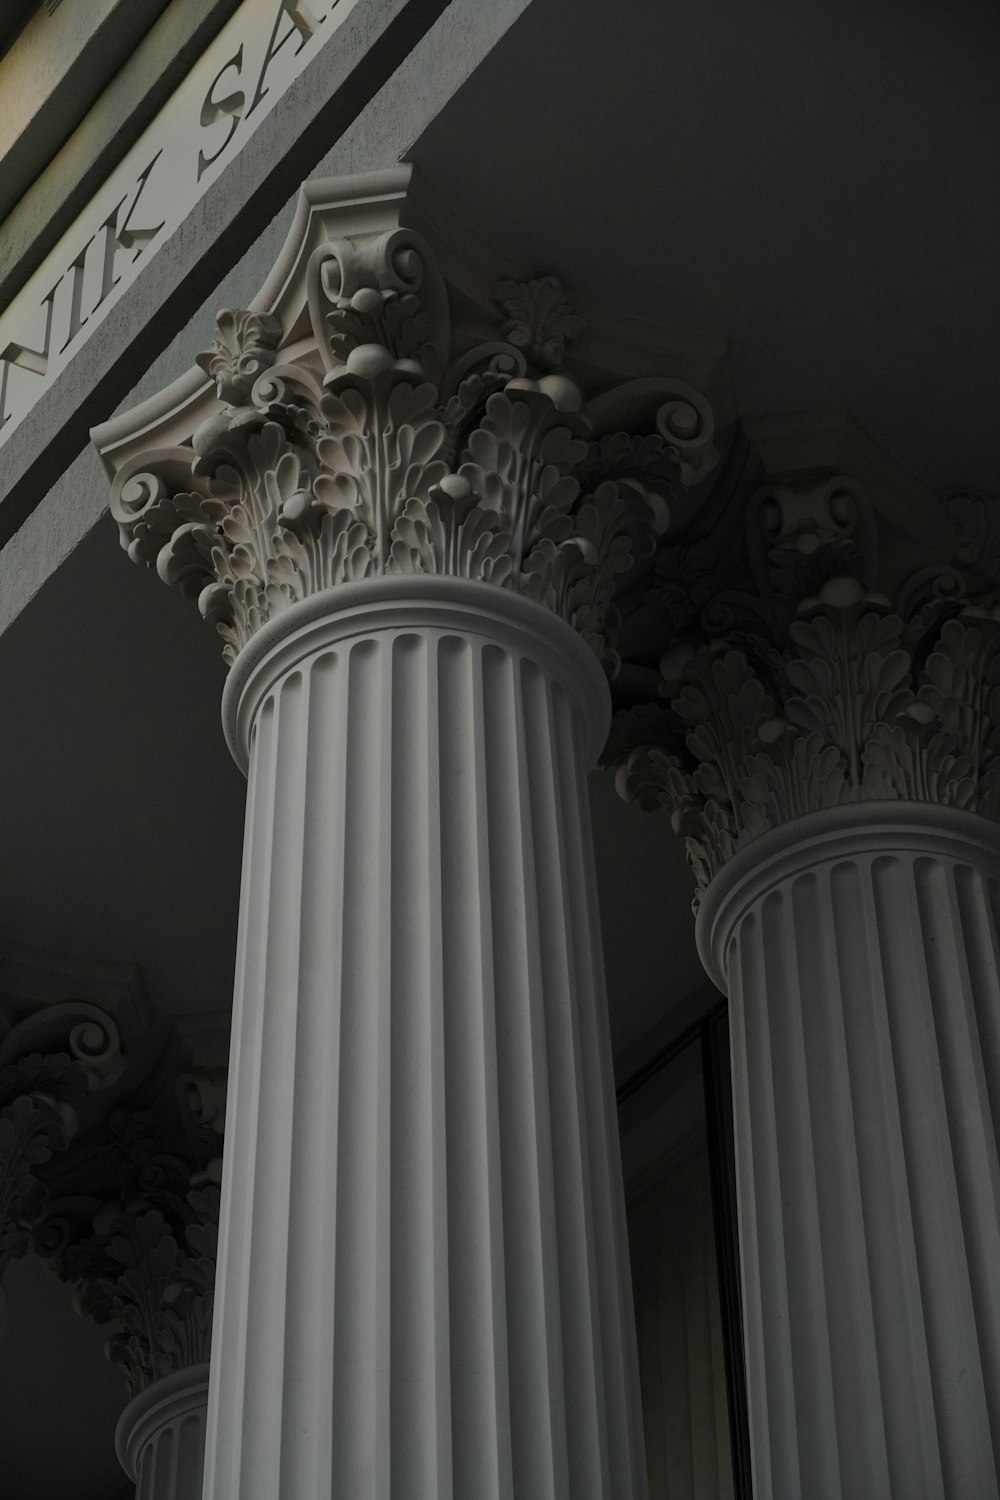 a close up of some white pillars with a building in the background